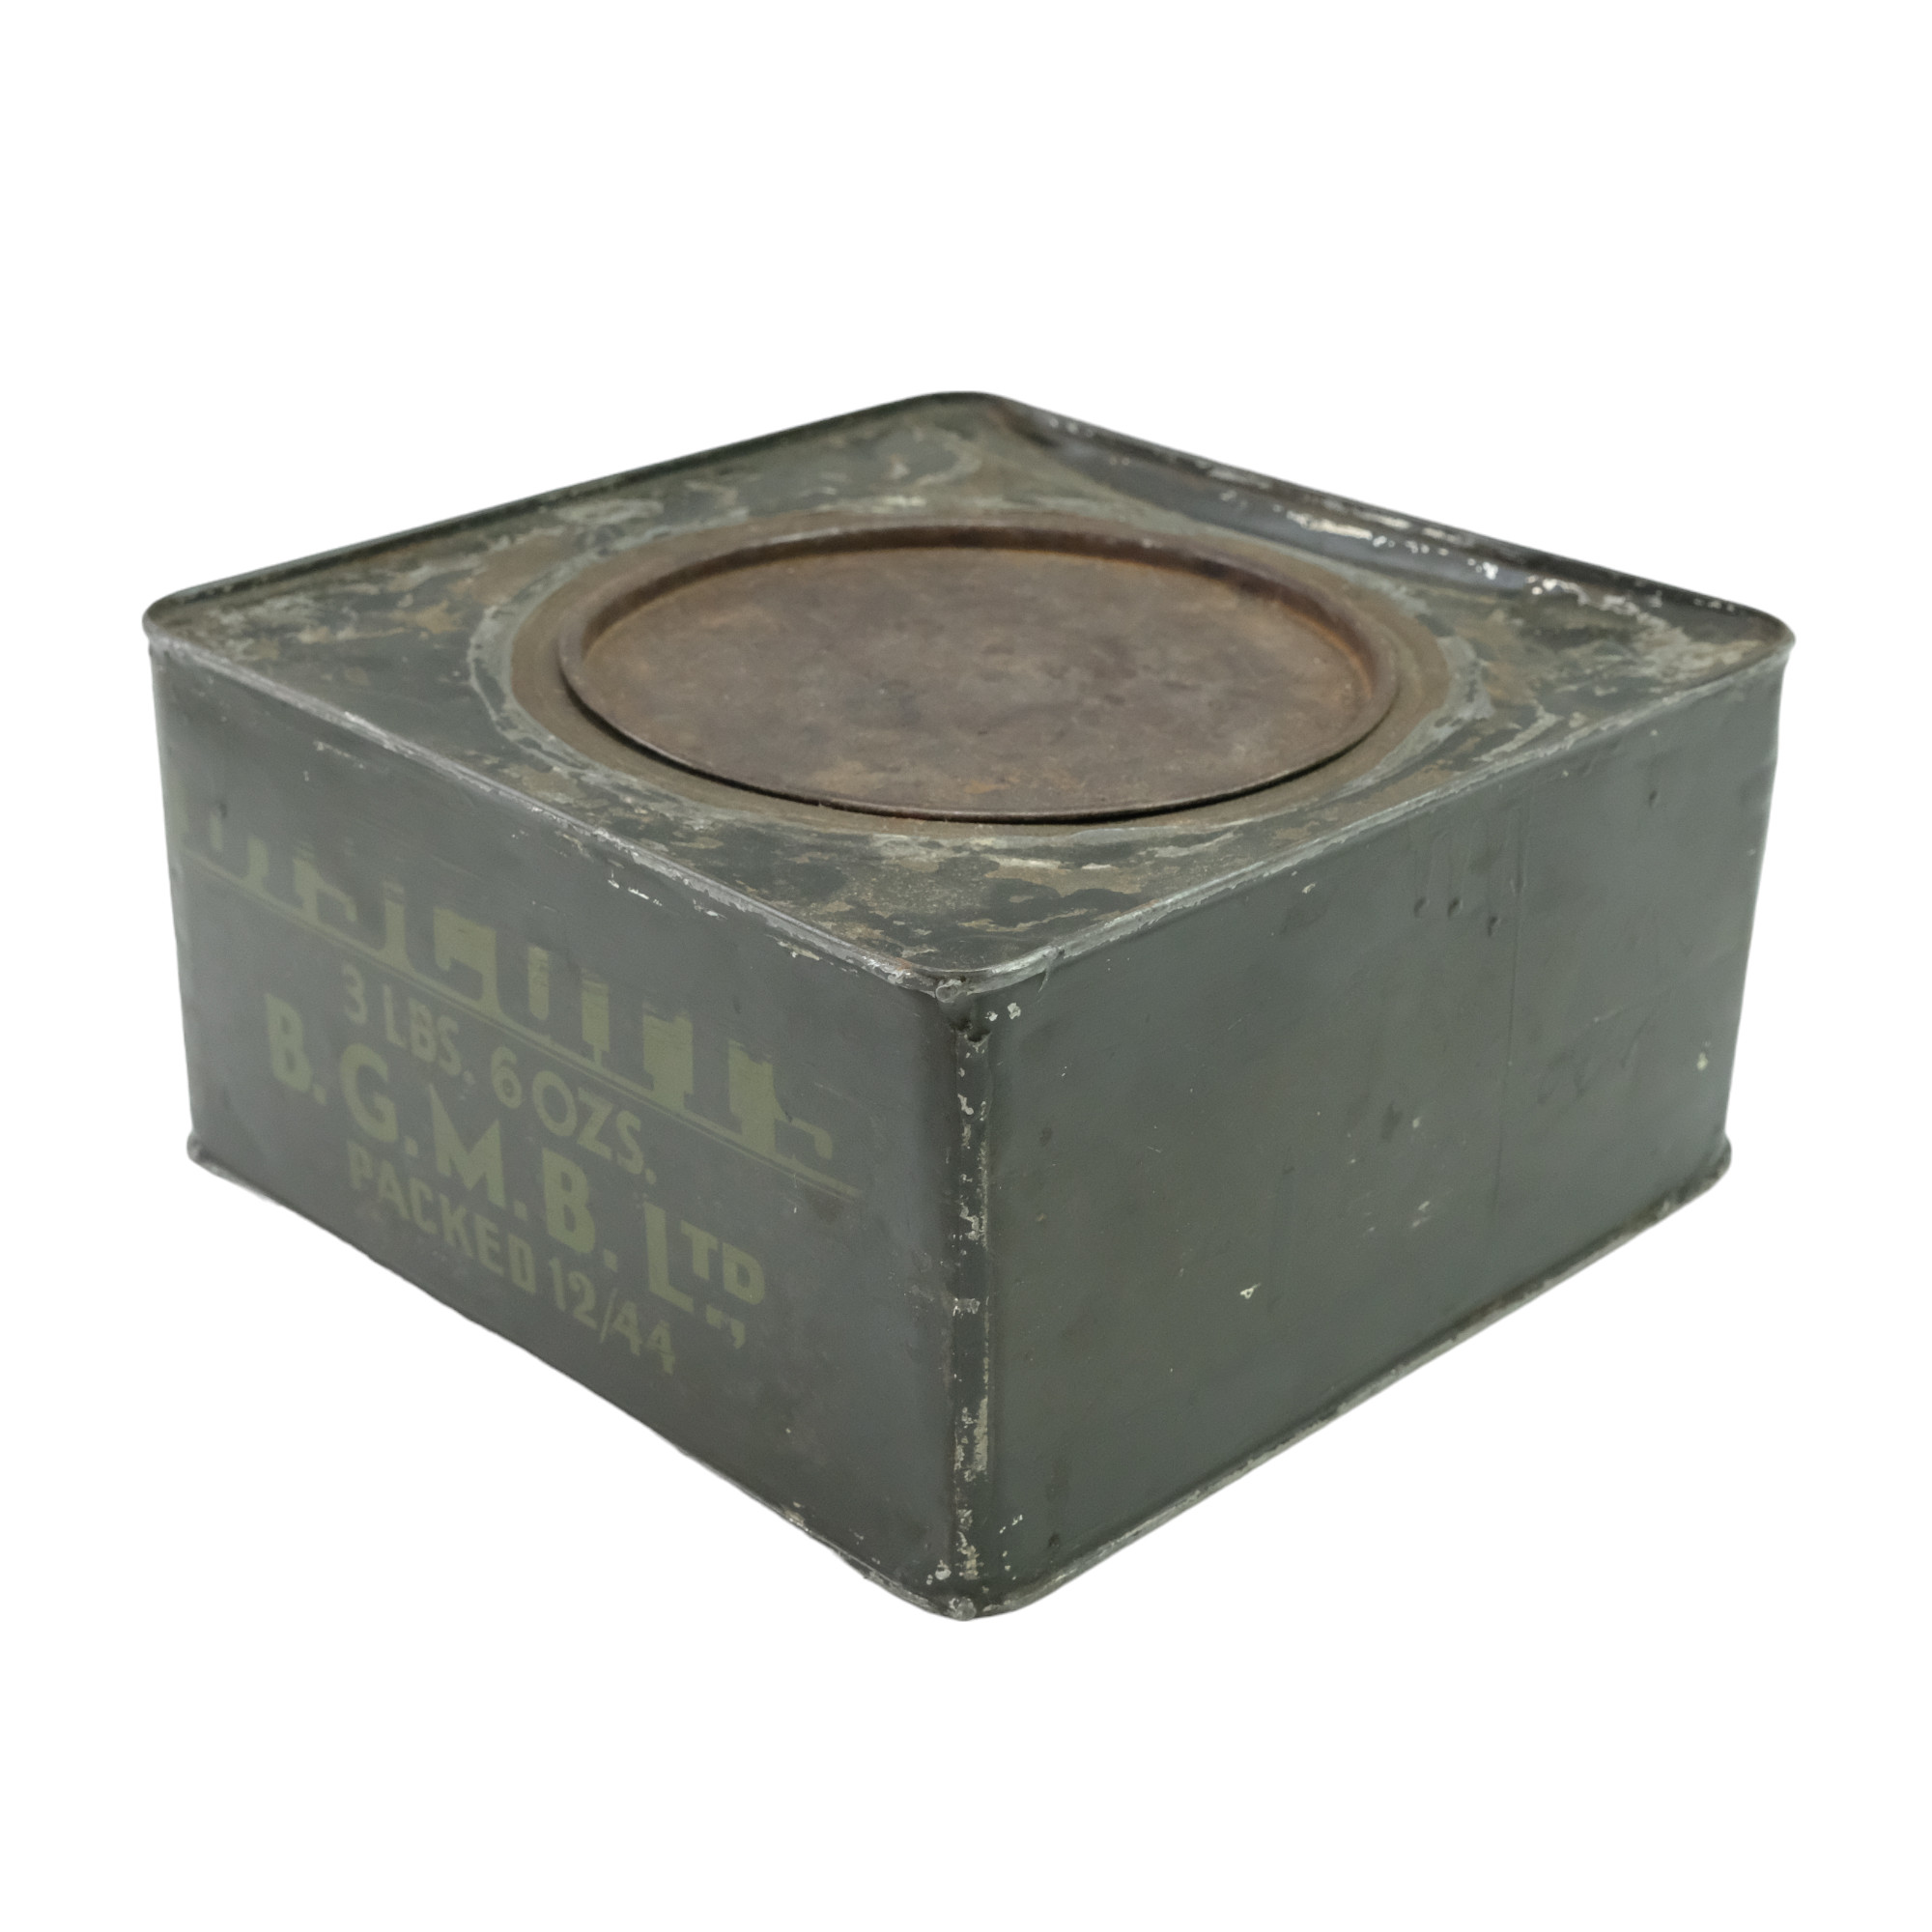 A 1944 British Army 3lb 6oz Biscuits ration tin - Image 2 of 2